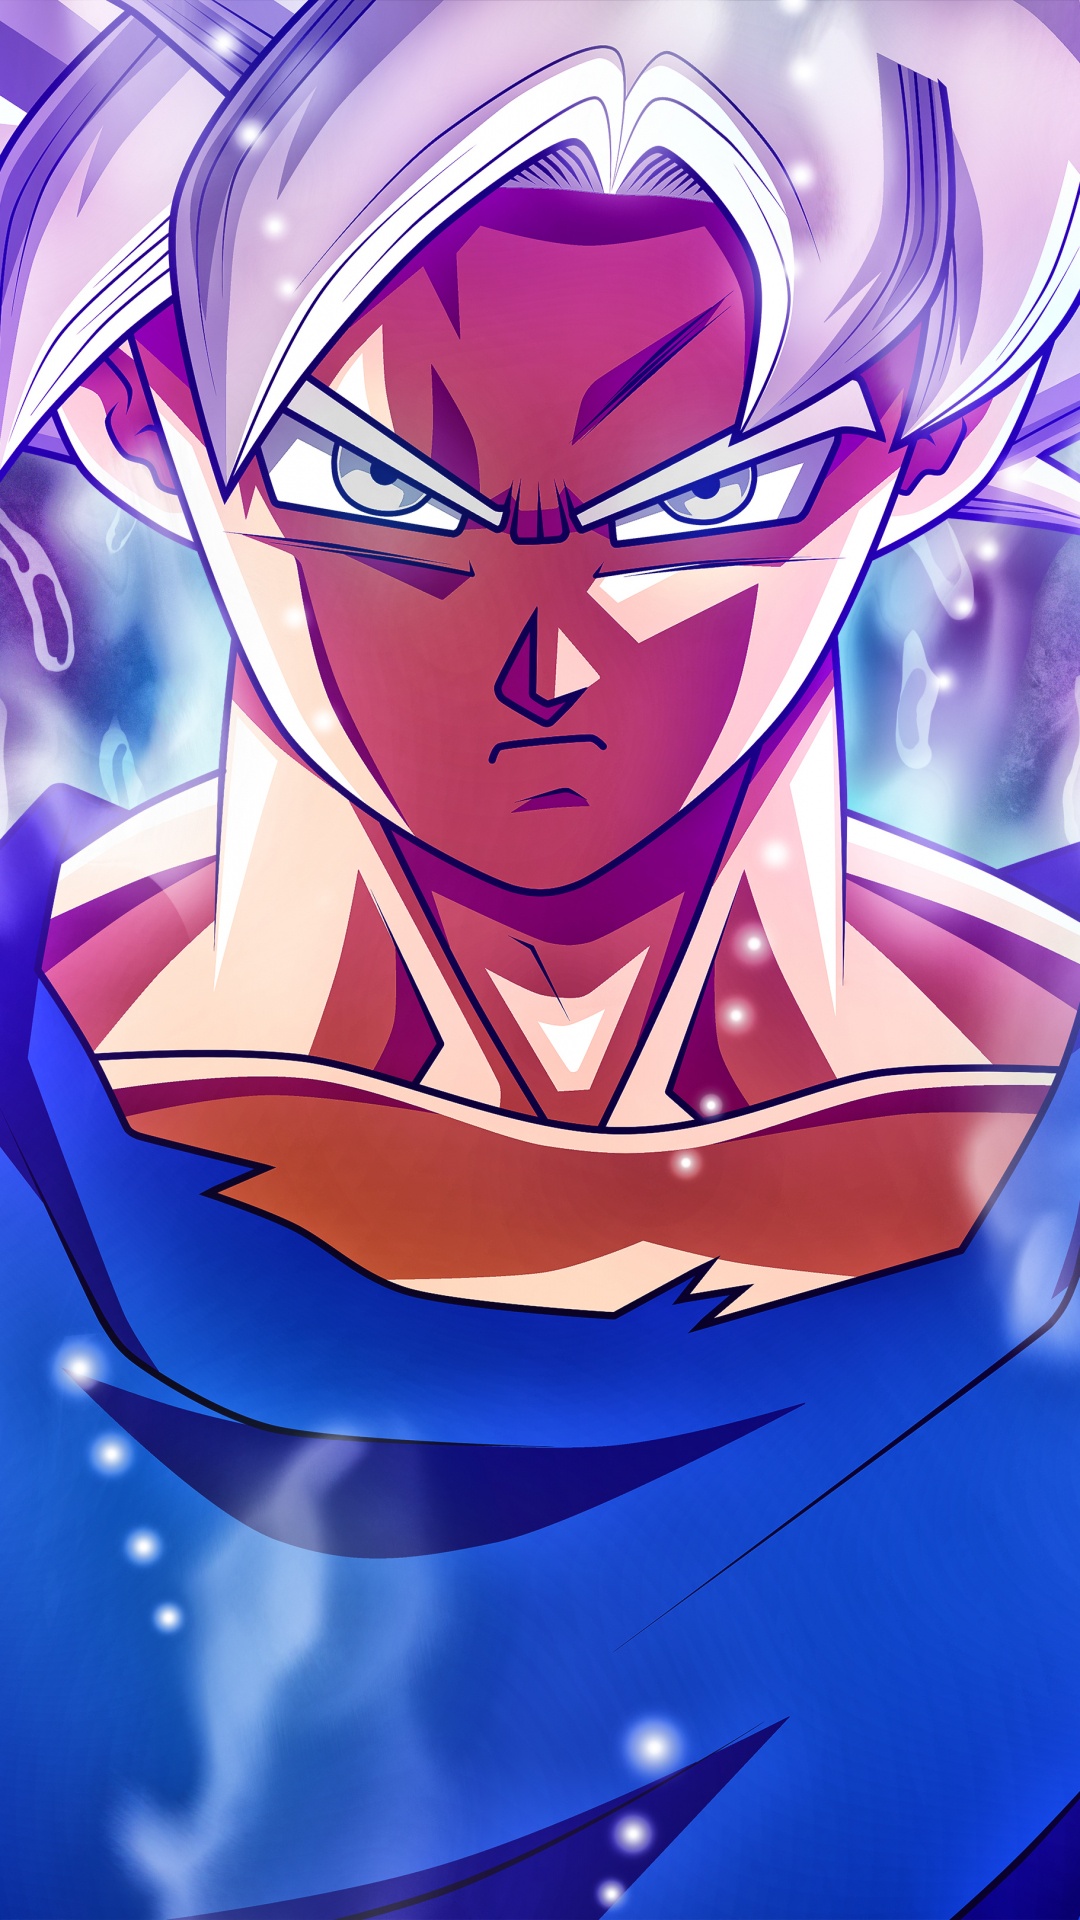 Personnage D'anime Masculin Aux Cheveux Bleus. Wallpaper in 1080x1920 Resolution